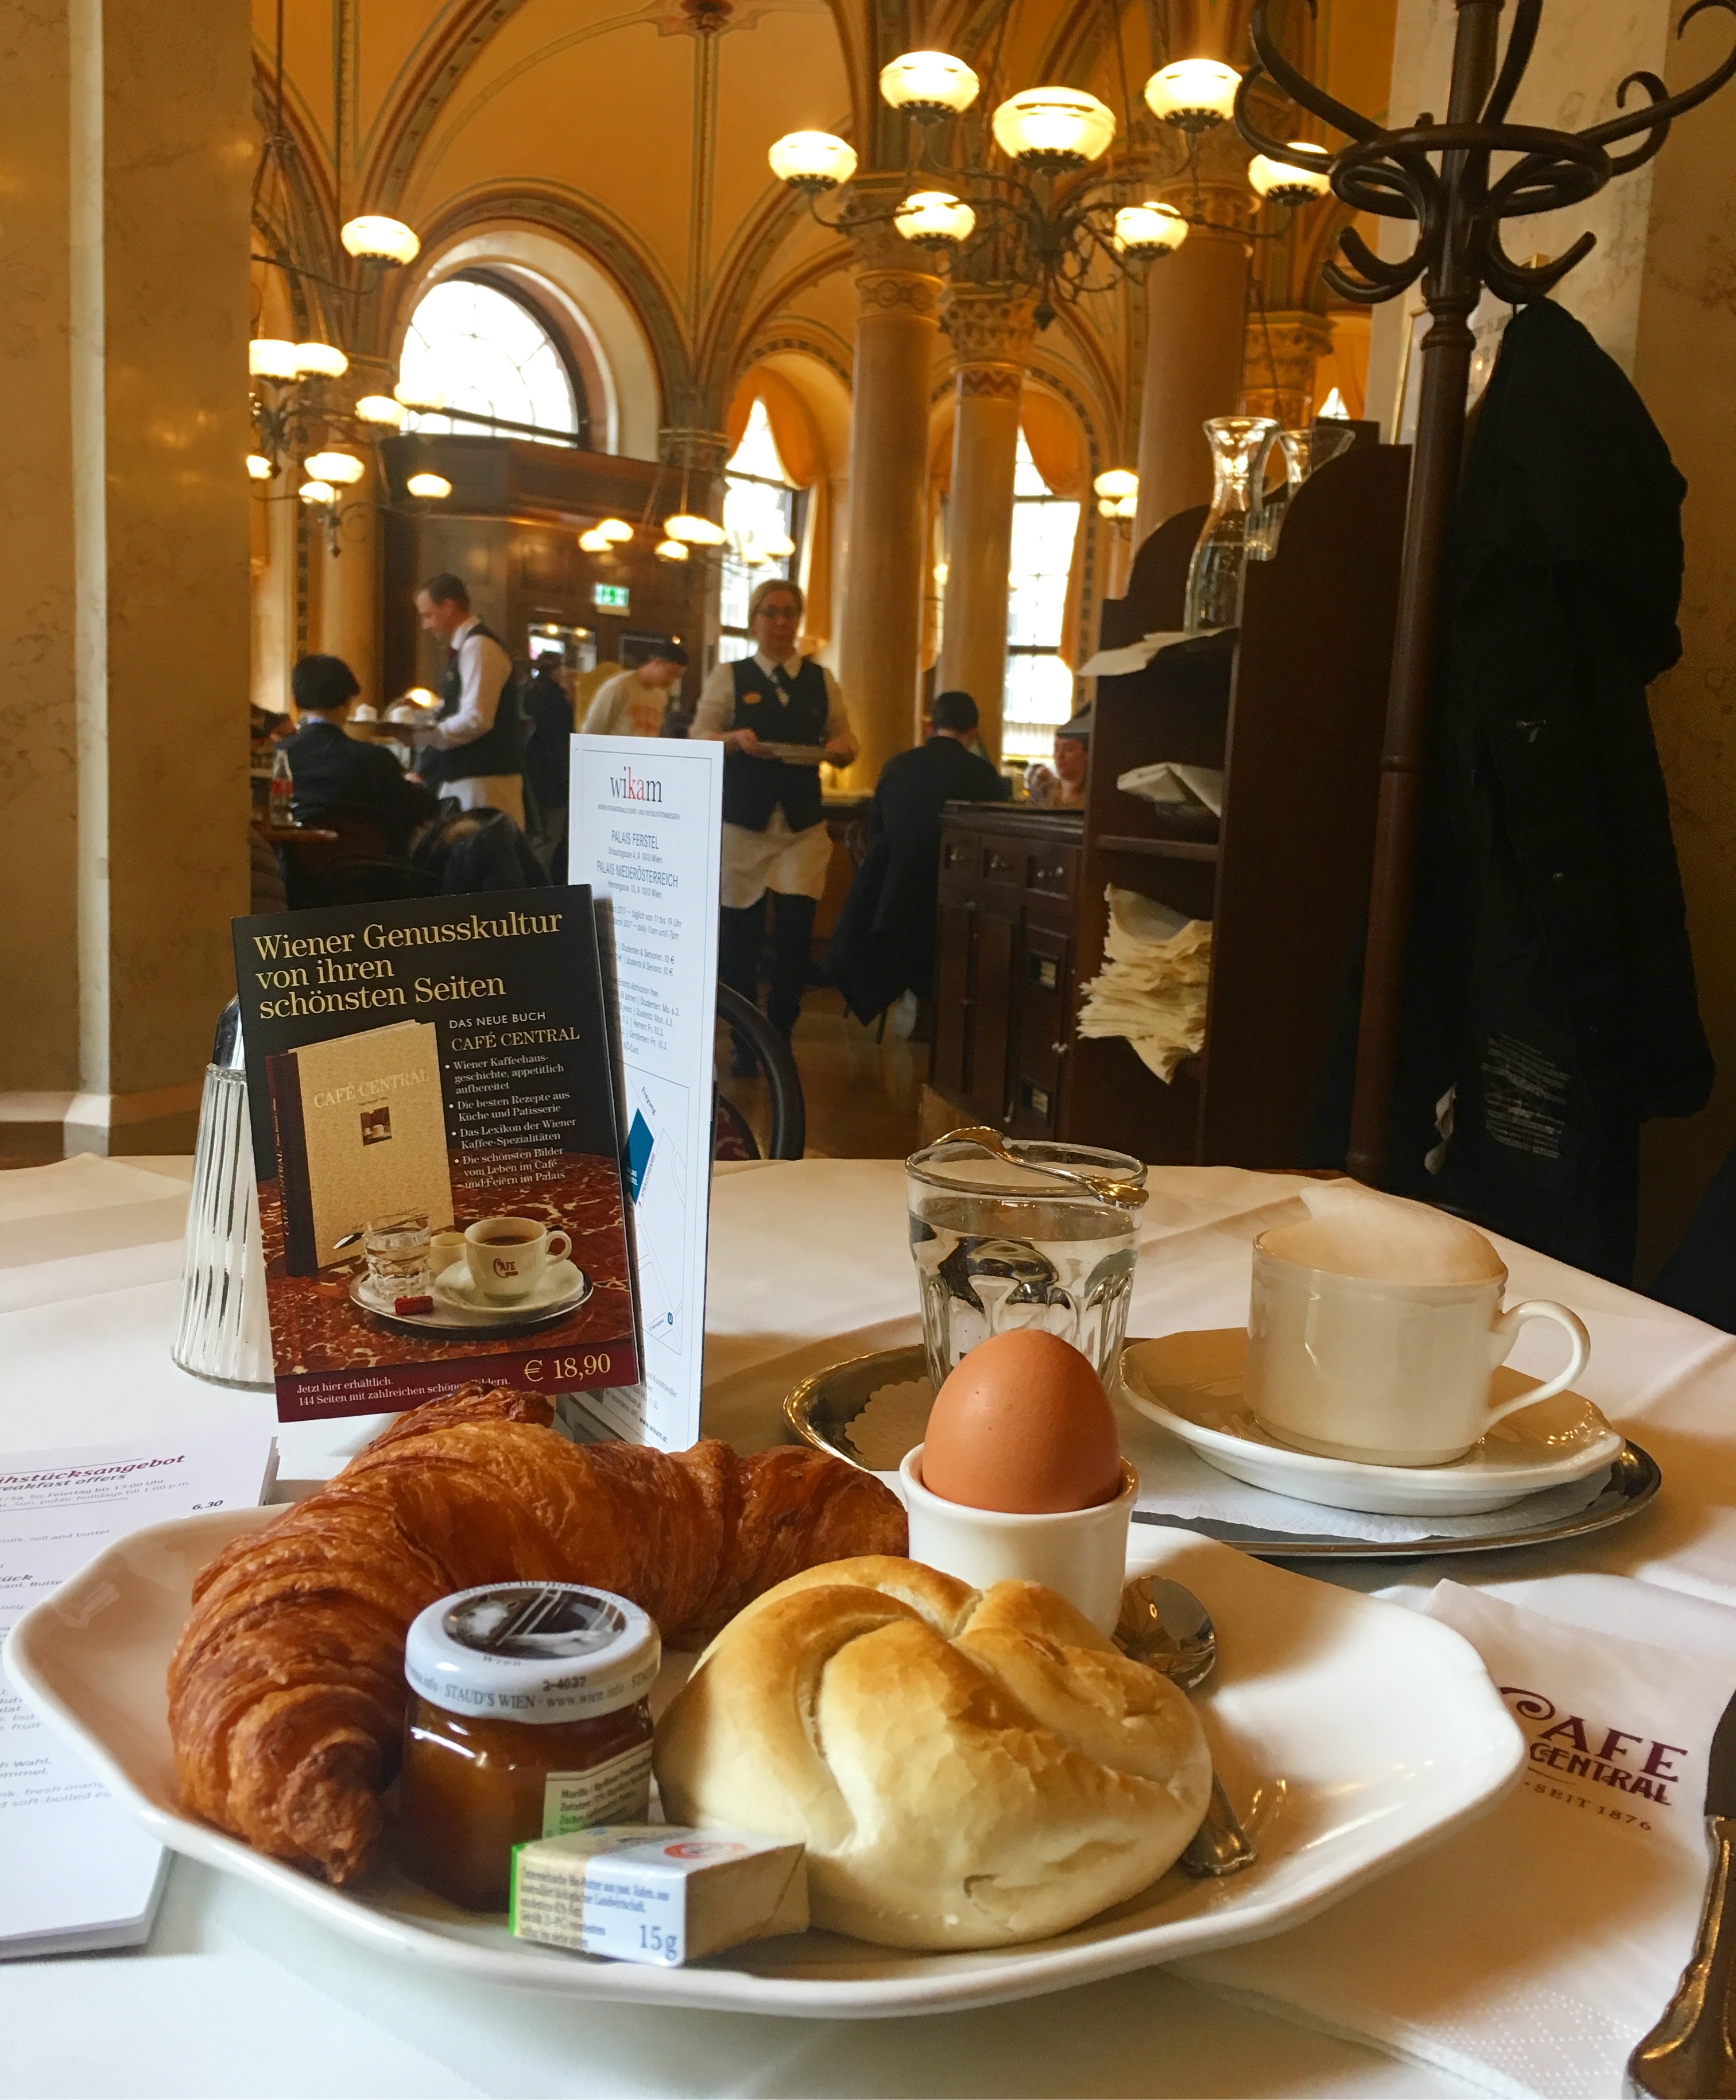 Cafe Central is one of most famous Viennese cafes